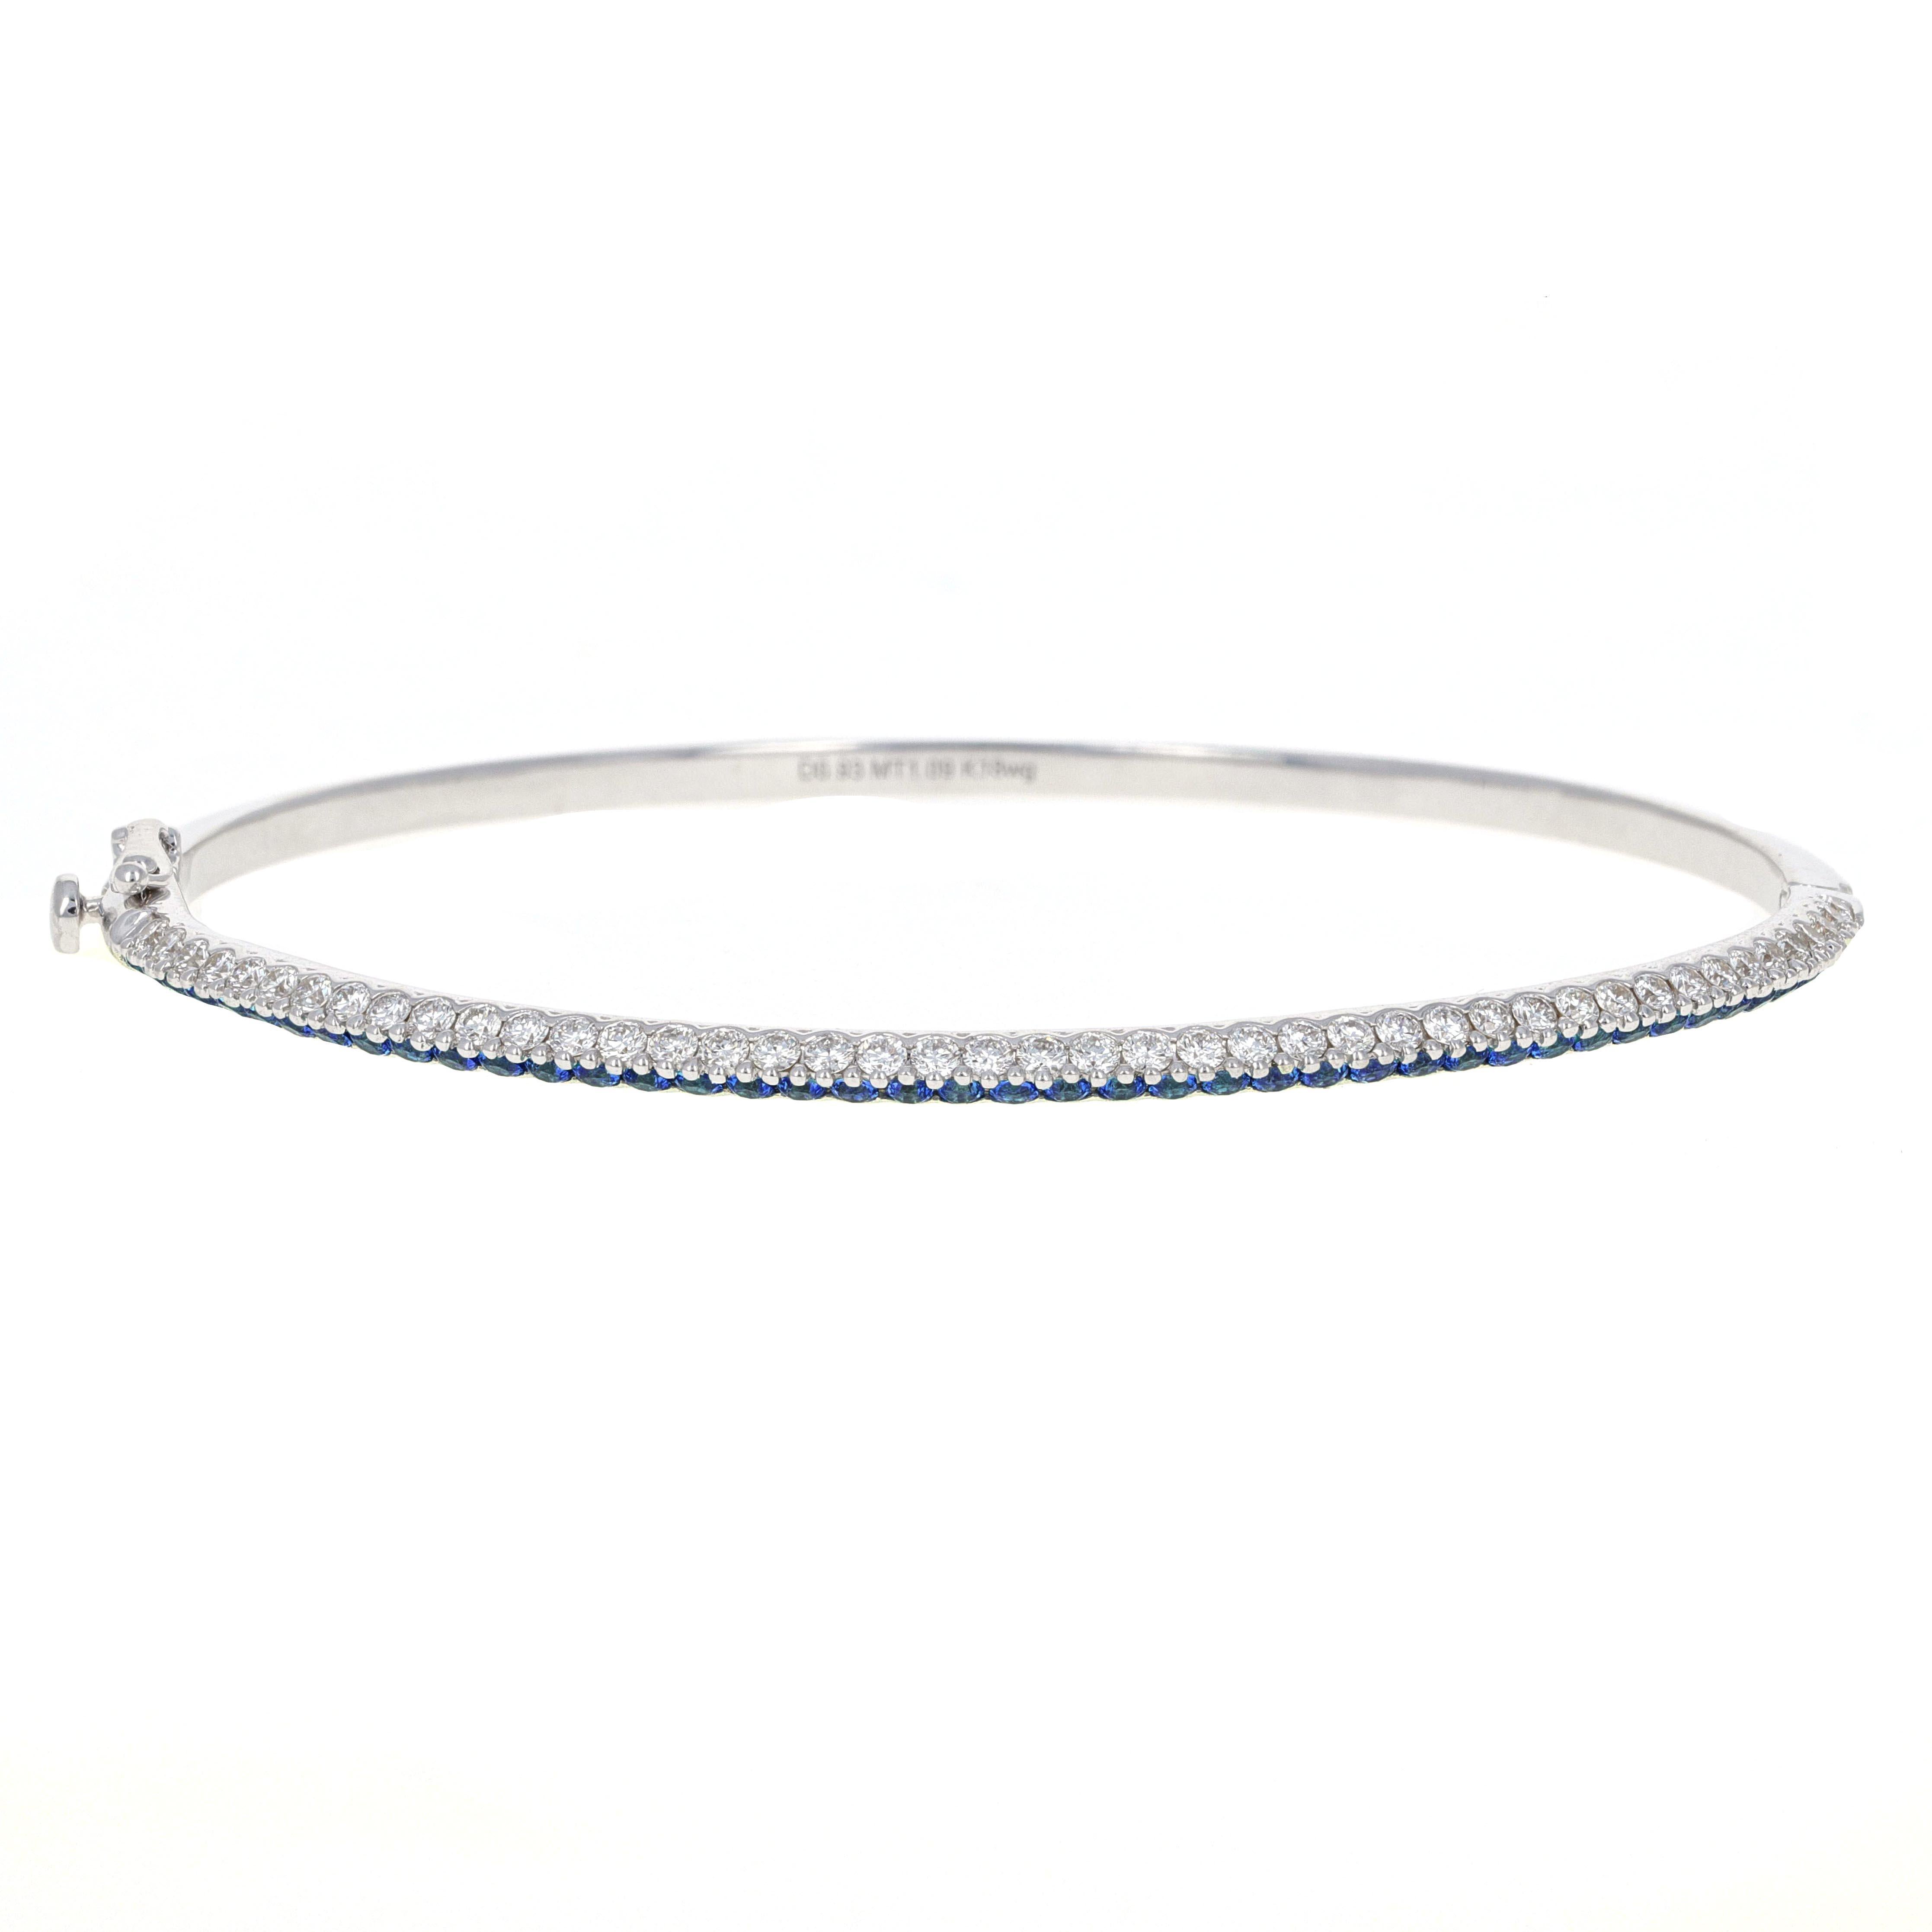 Handmade 18 karat white gold blue sapphire and diamond bangle. The bangle has 44 round brilliant white diamonds weighing a total of 0.93 carats. There is also 44 blue sapphires weighing a total of 1.29 carats total weight.
This bangle is very